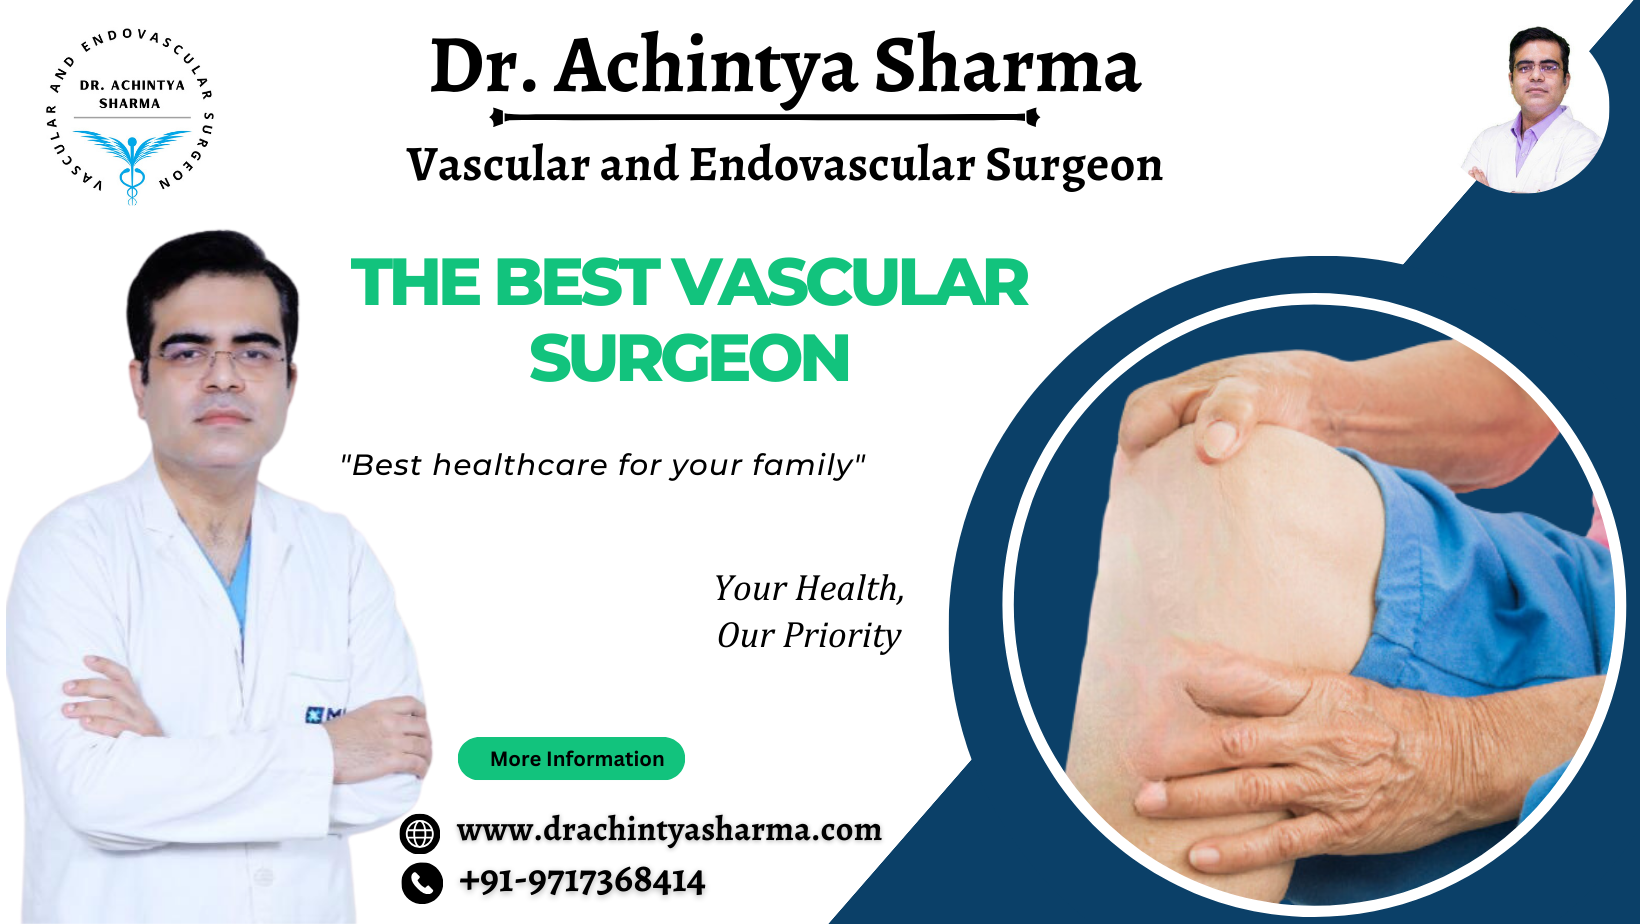 Why You Should Consider the Best Vascular Surgeon